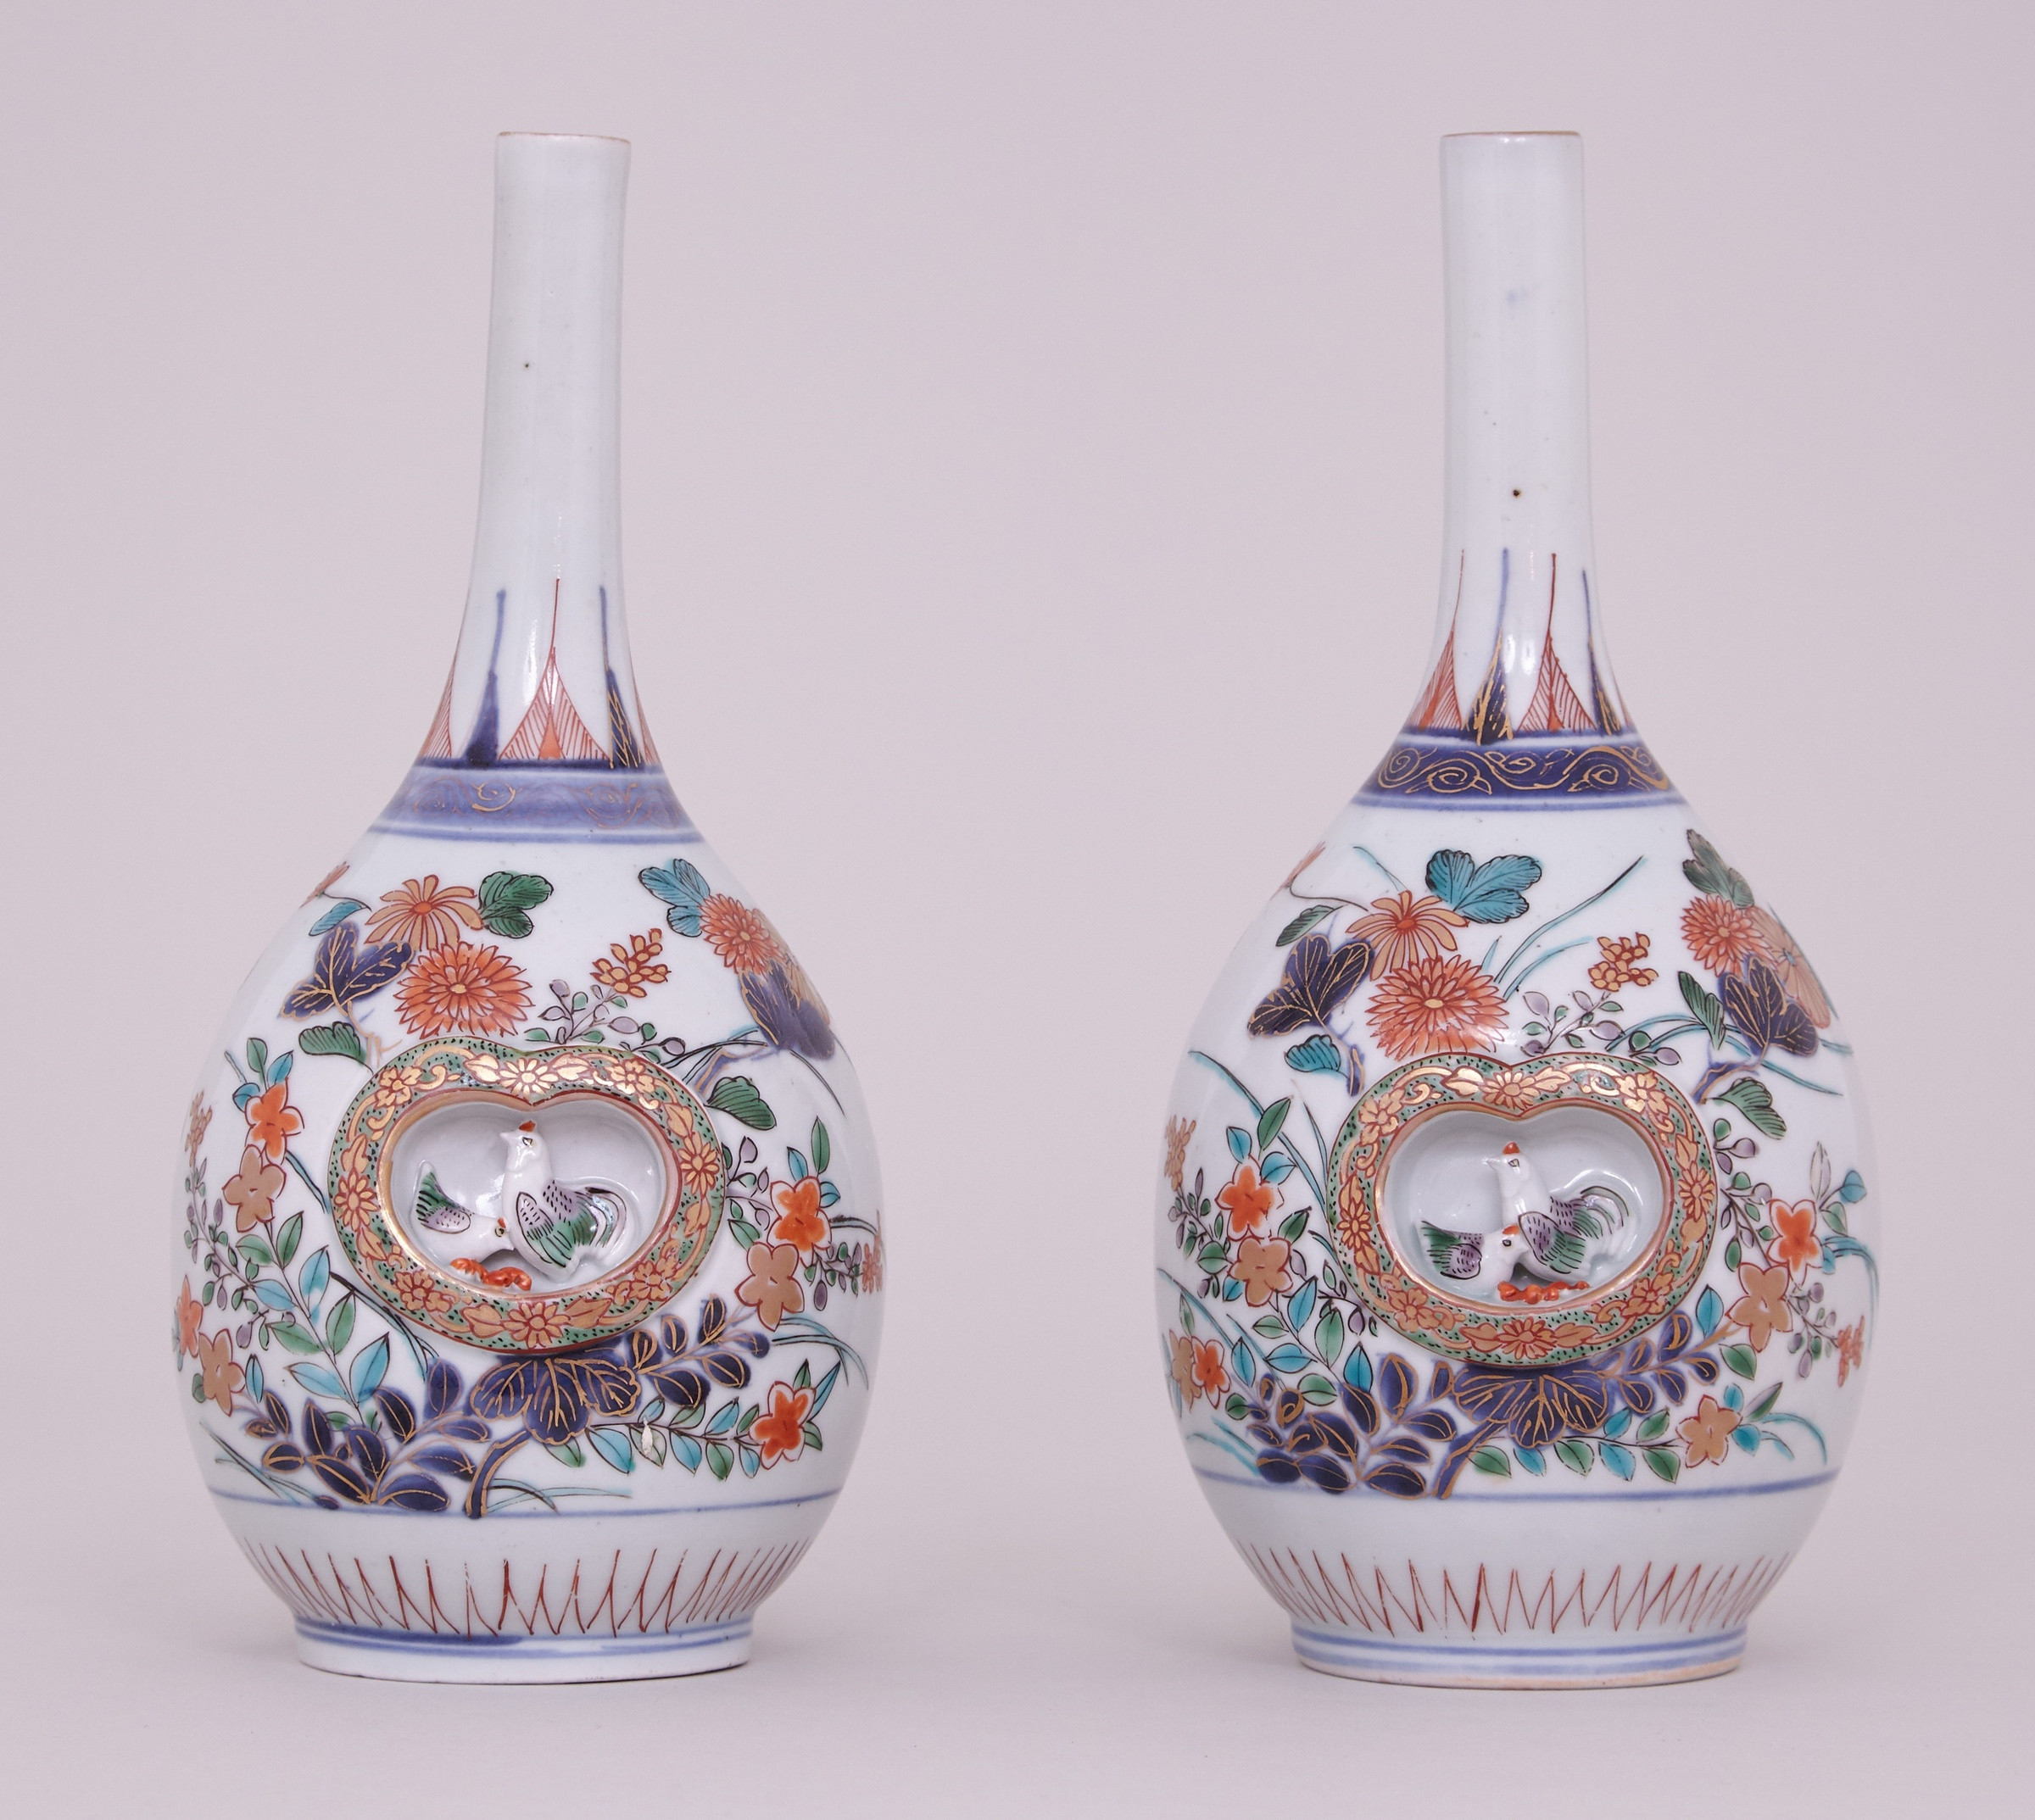 20 attractive Tall Blue Ceramic Vase 2024 free download tall blue ceramic vase of a pair of fine japanese imari bottle vases late 17th early 18th regarding a pair of fine japanese imari bottle vases